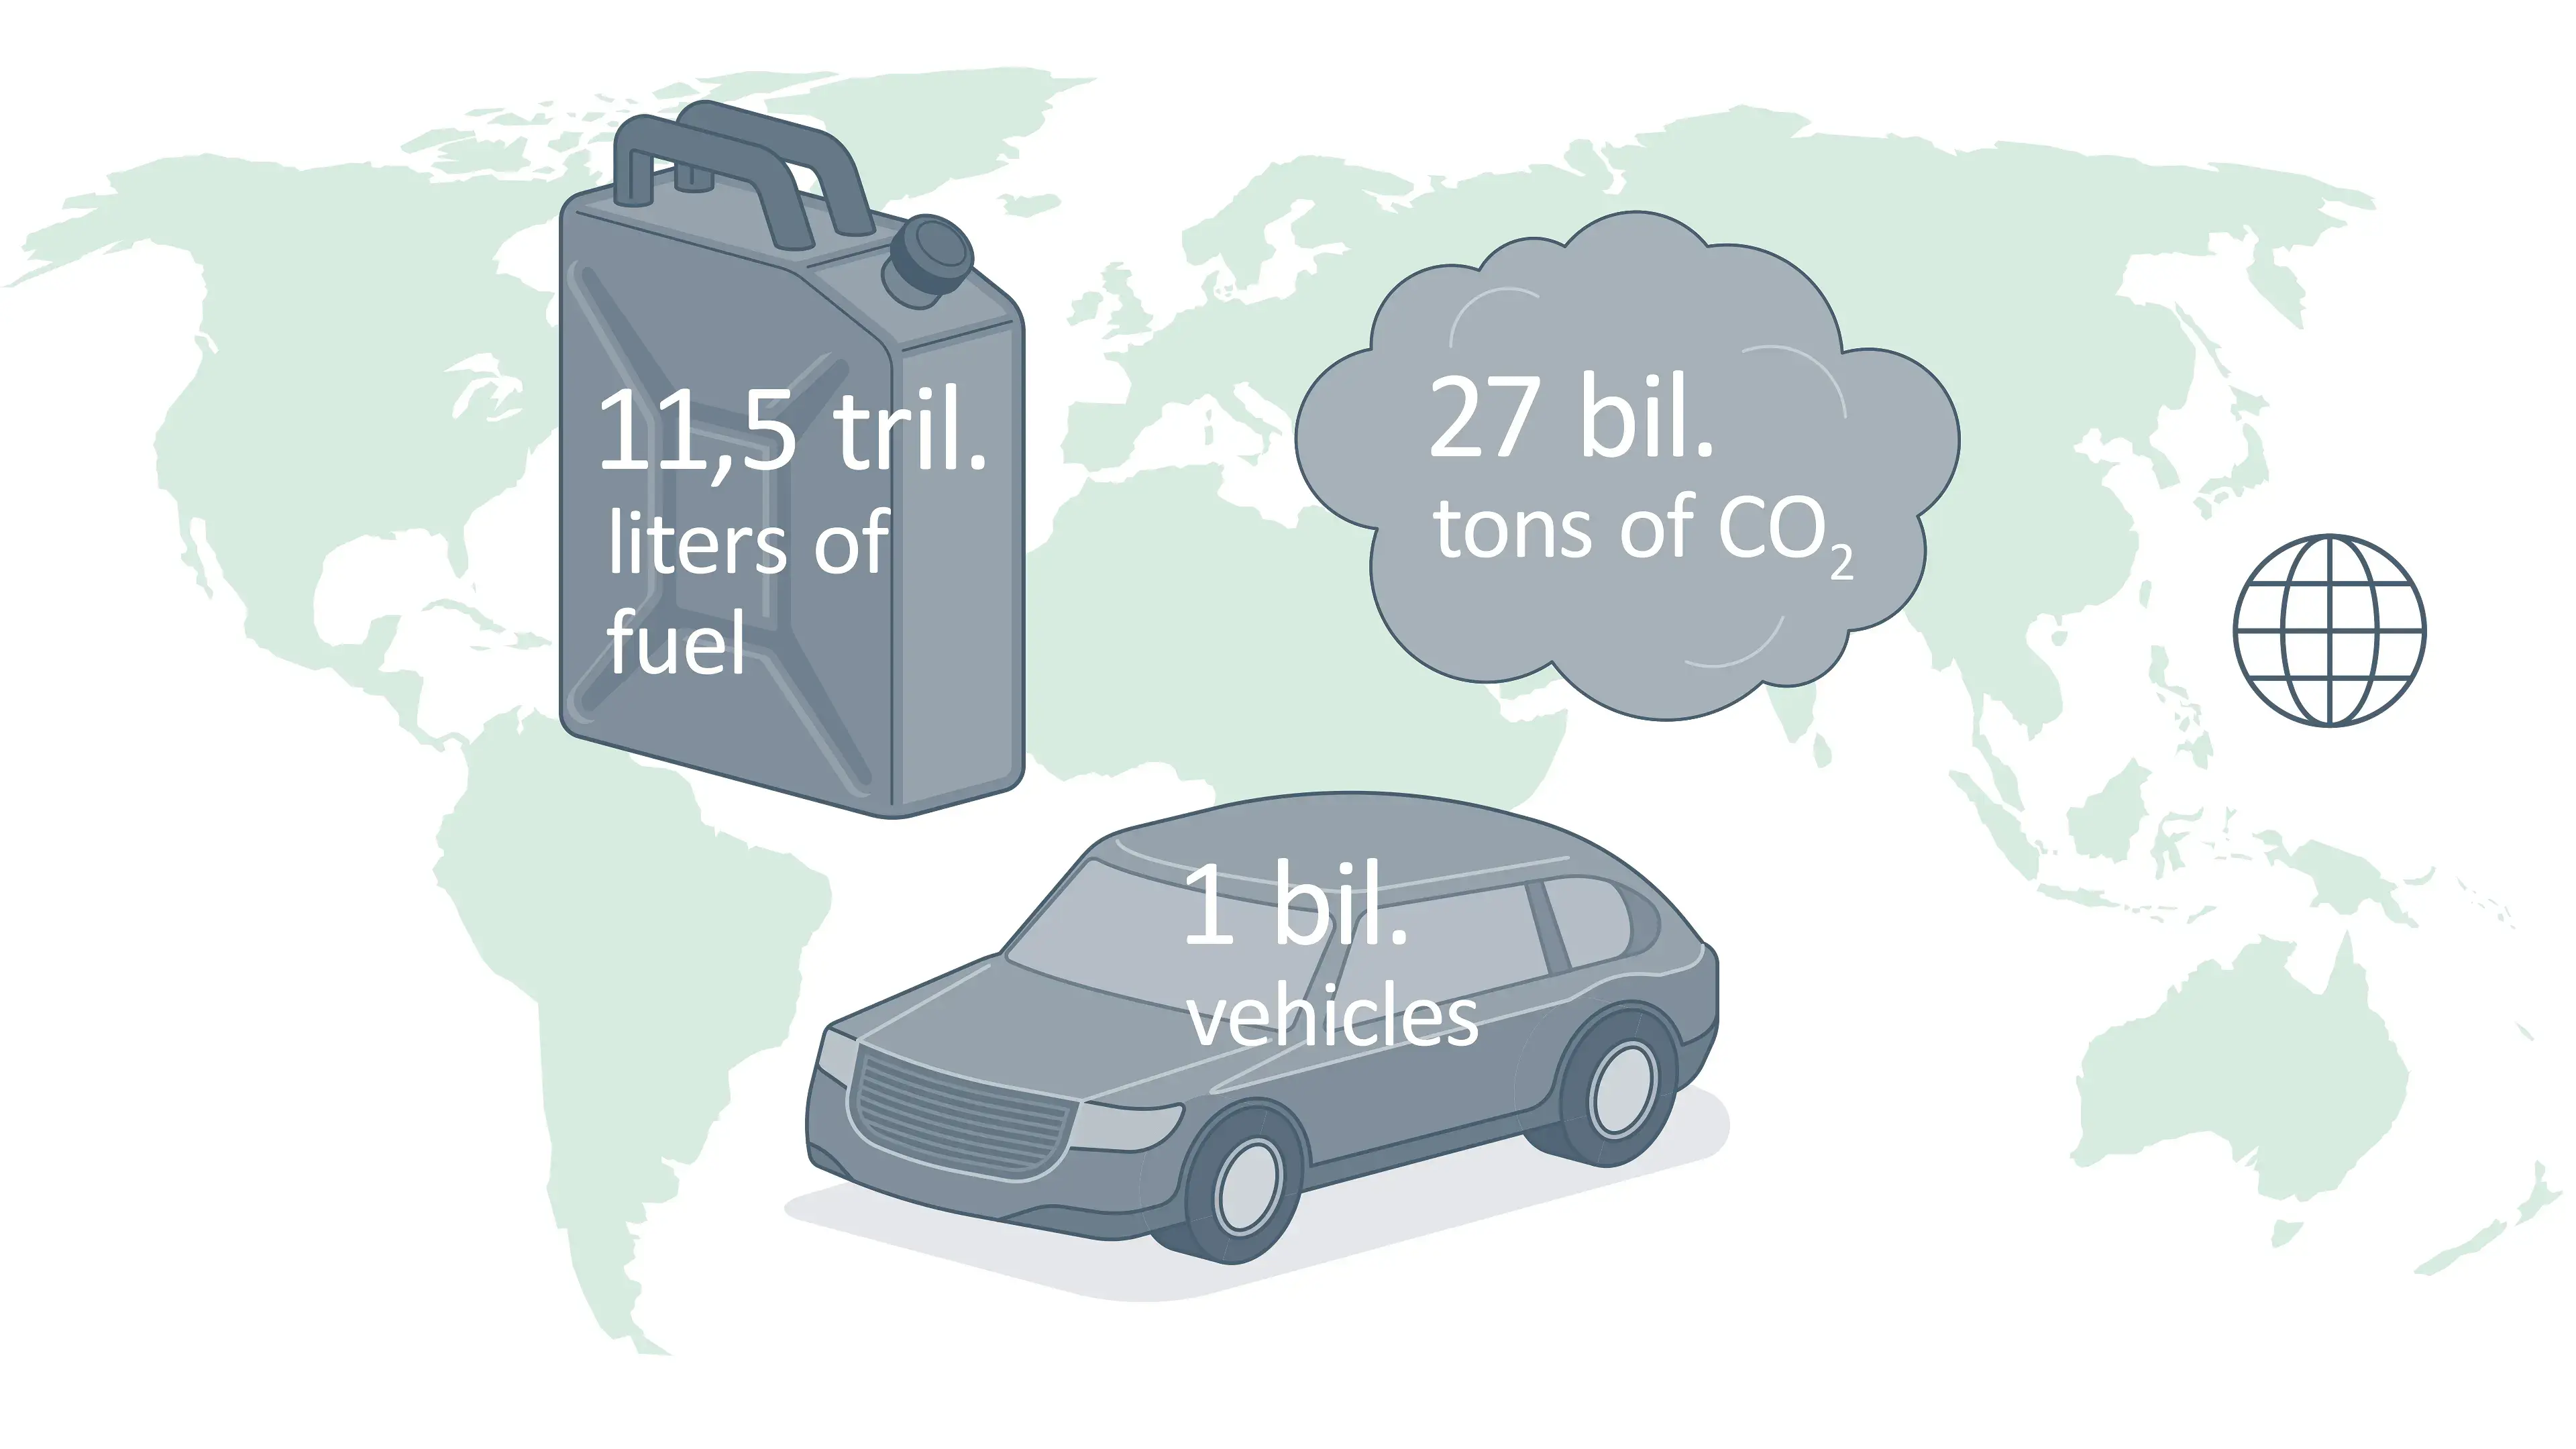 Chart: Consumption and CO2 emissions of 1.5 billion vehicles with ICE